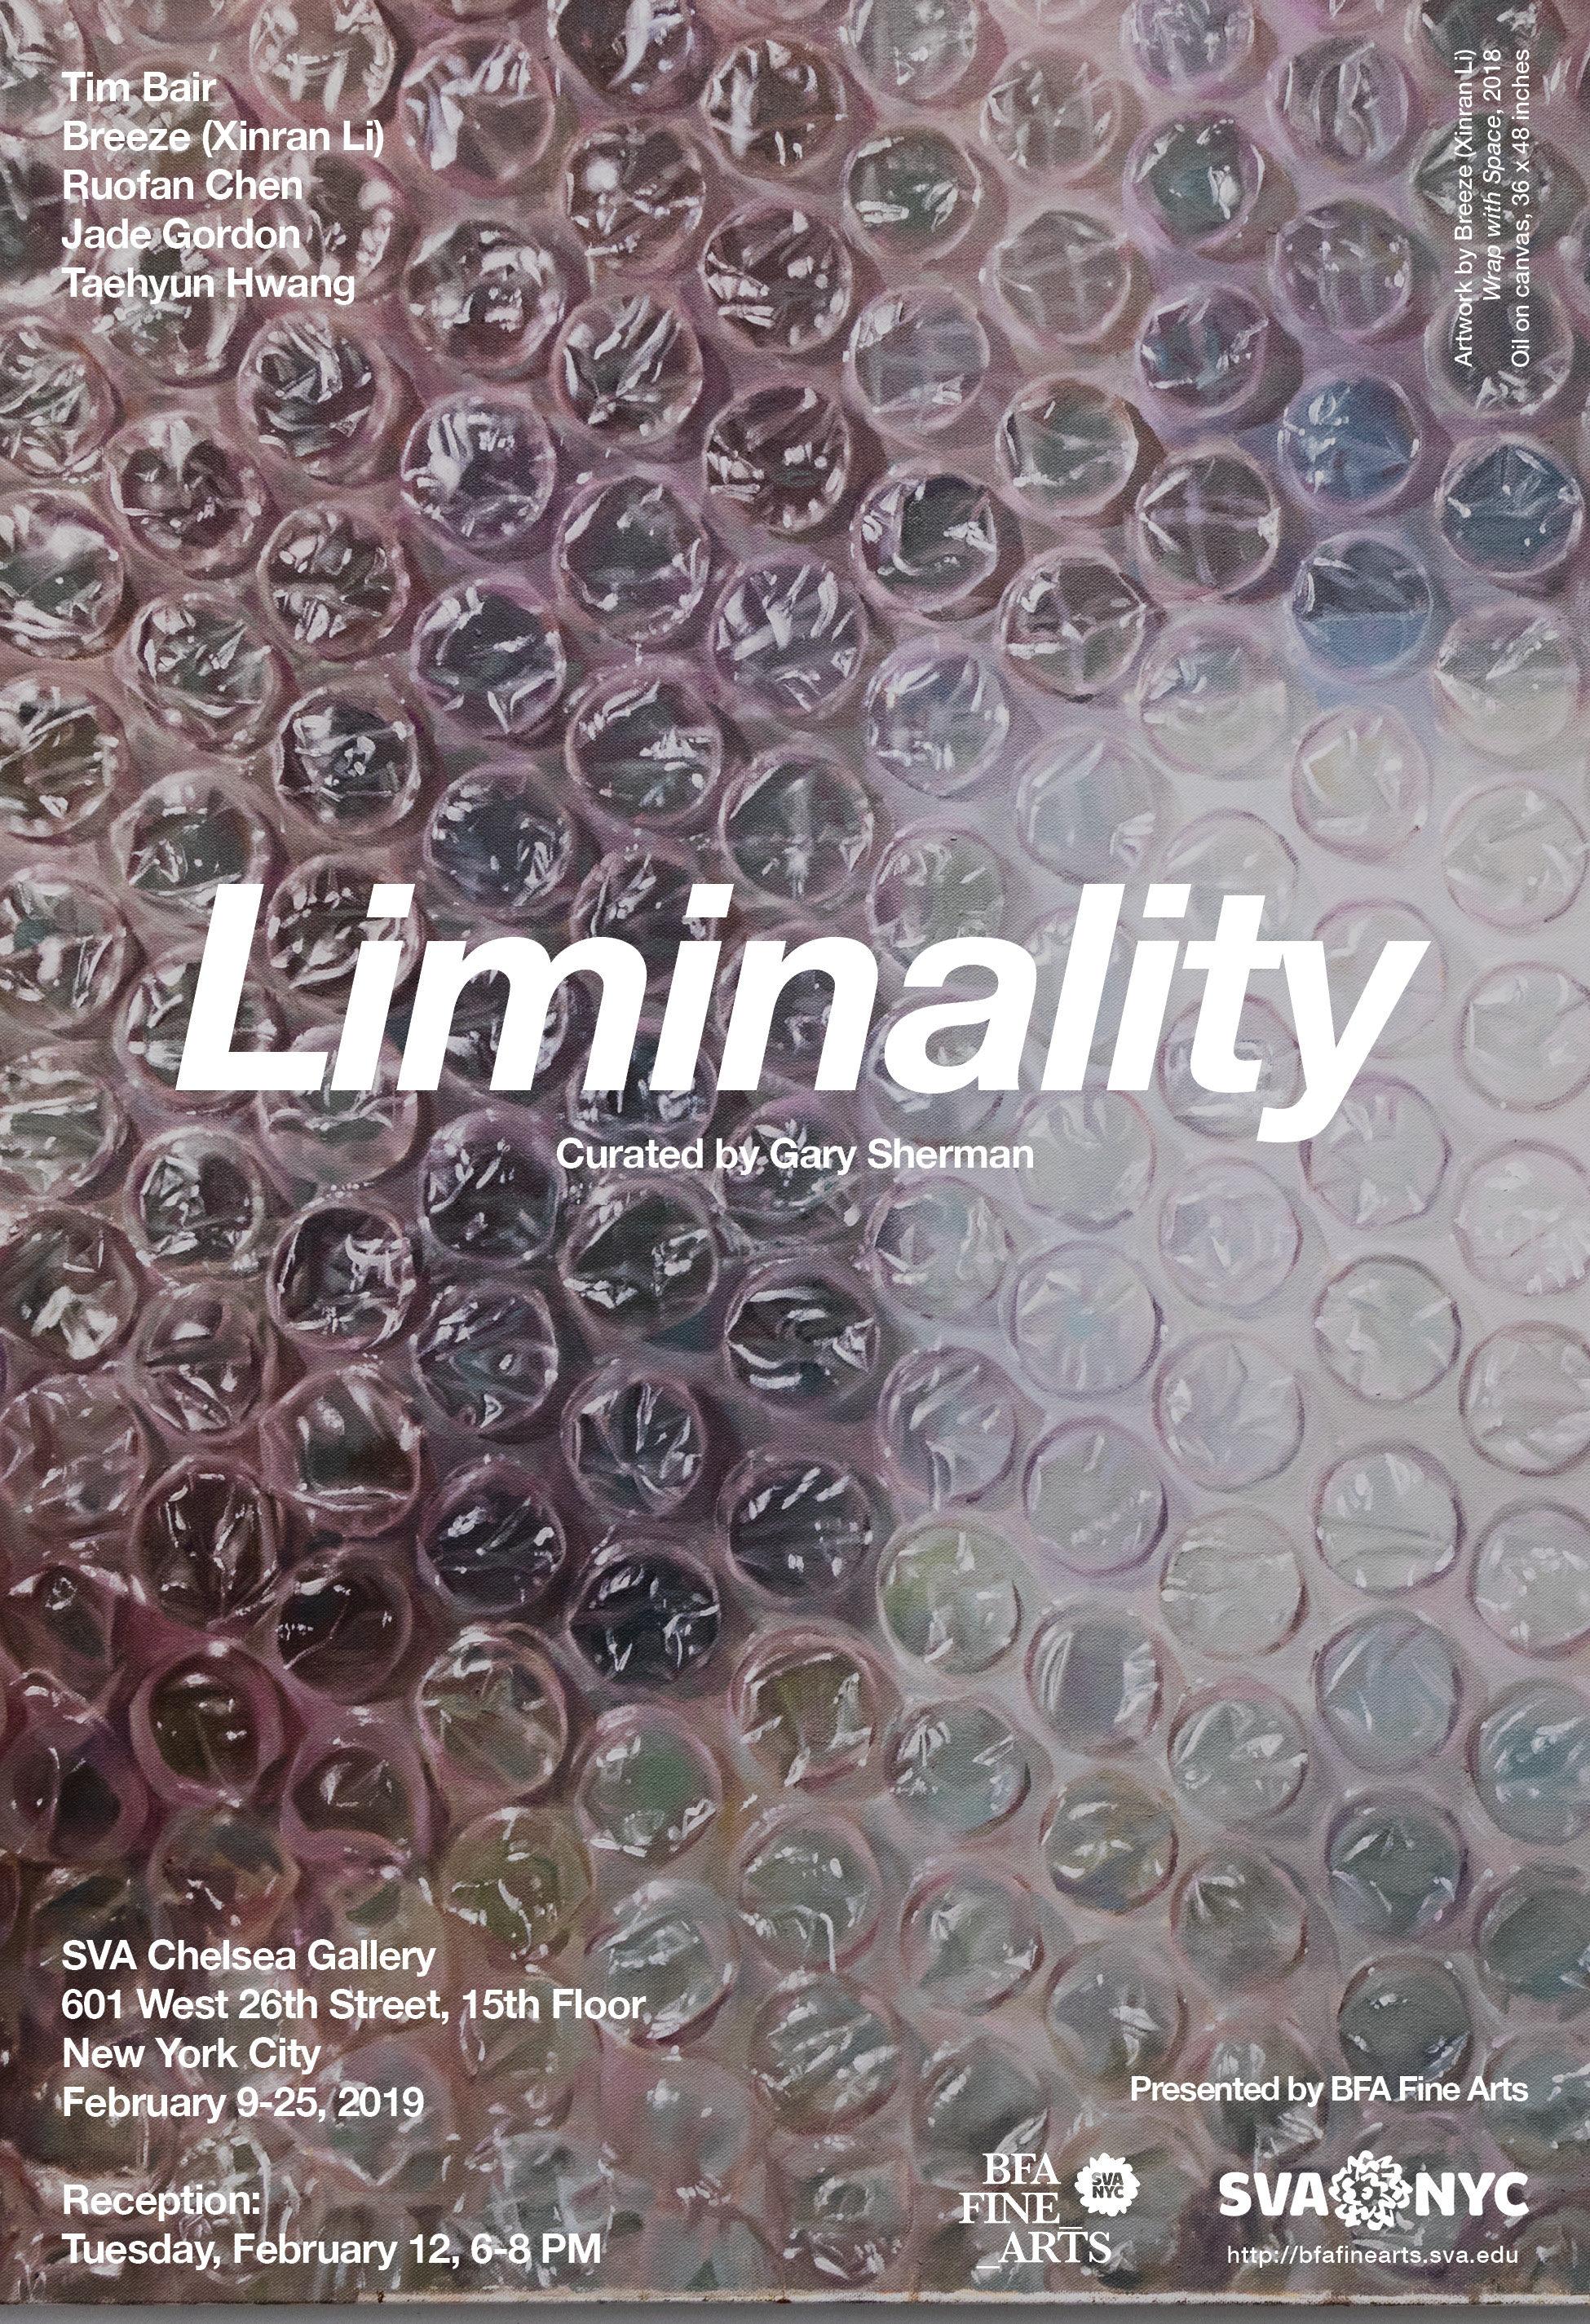 Poster of "Liminality", Curated by Gary Sherman